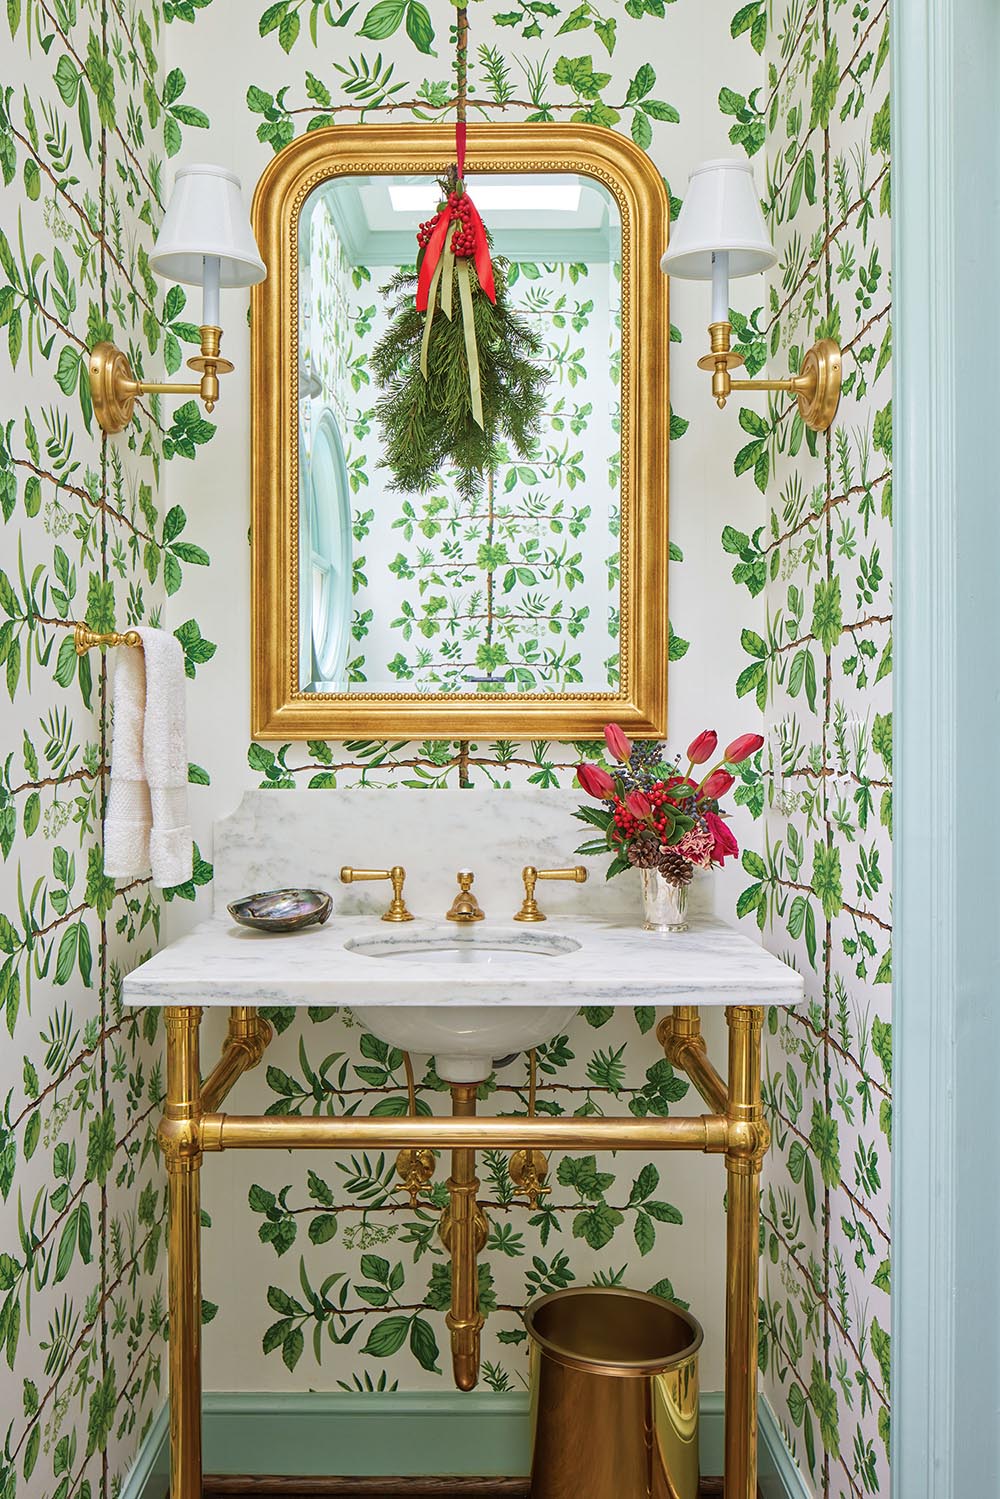 Powder room bathroom decorated with green and white wallpaper and holiday greenery